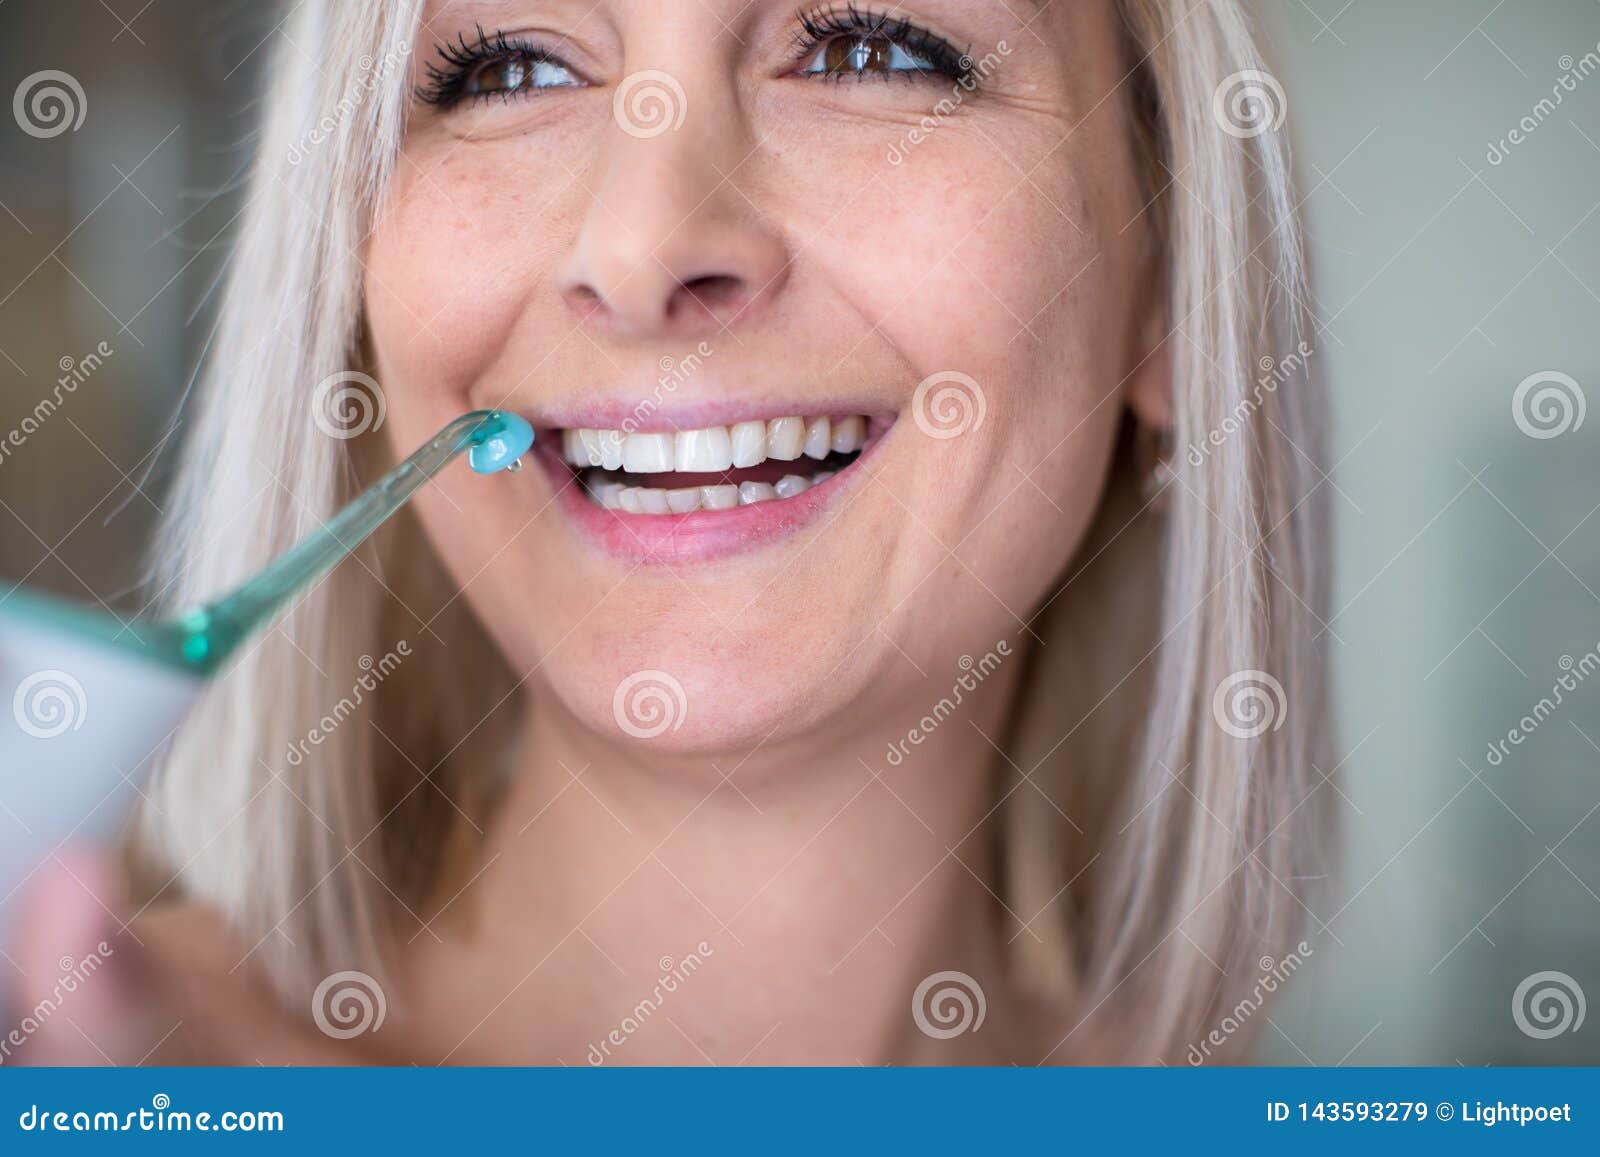 Pretty Middle Aged Woman Brushing Her Teeth Stock Image Image Of Foaming Loss 143593279 